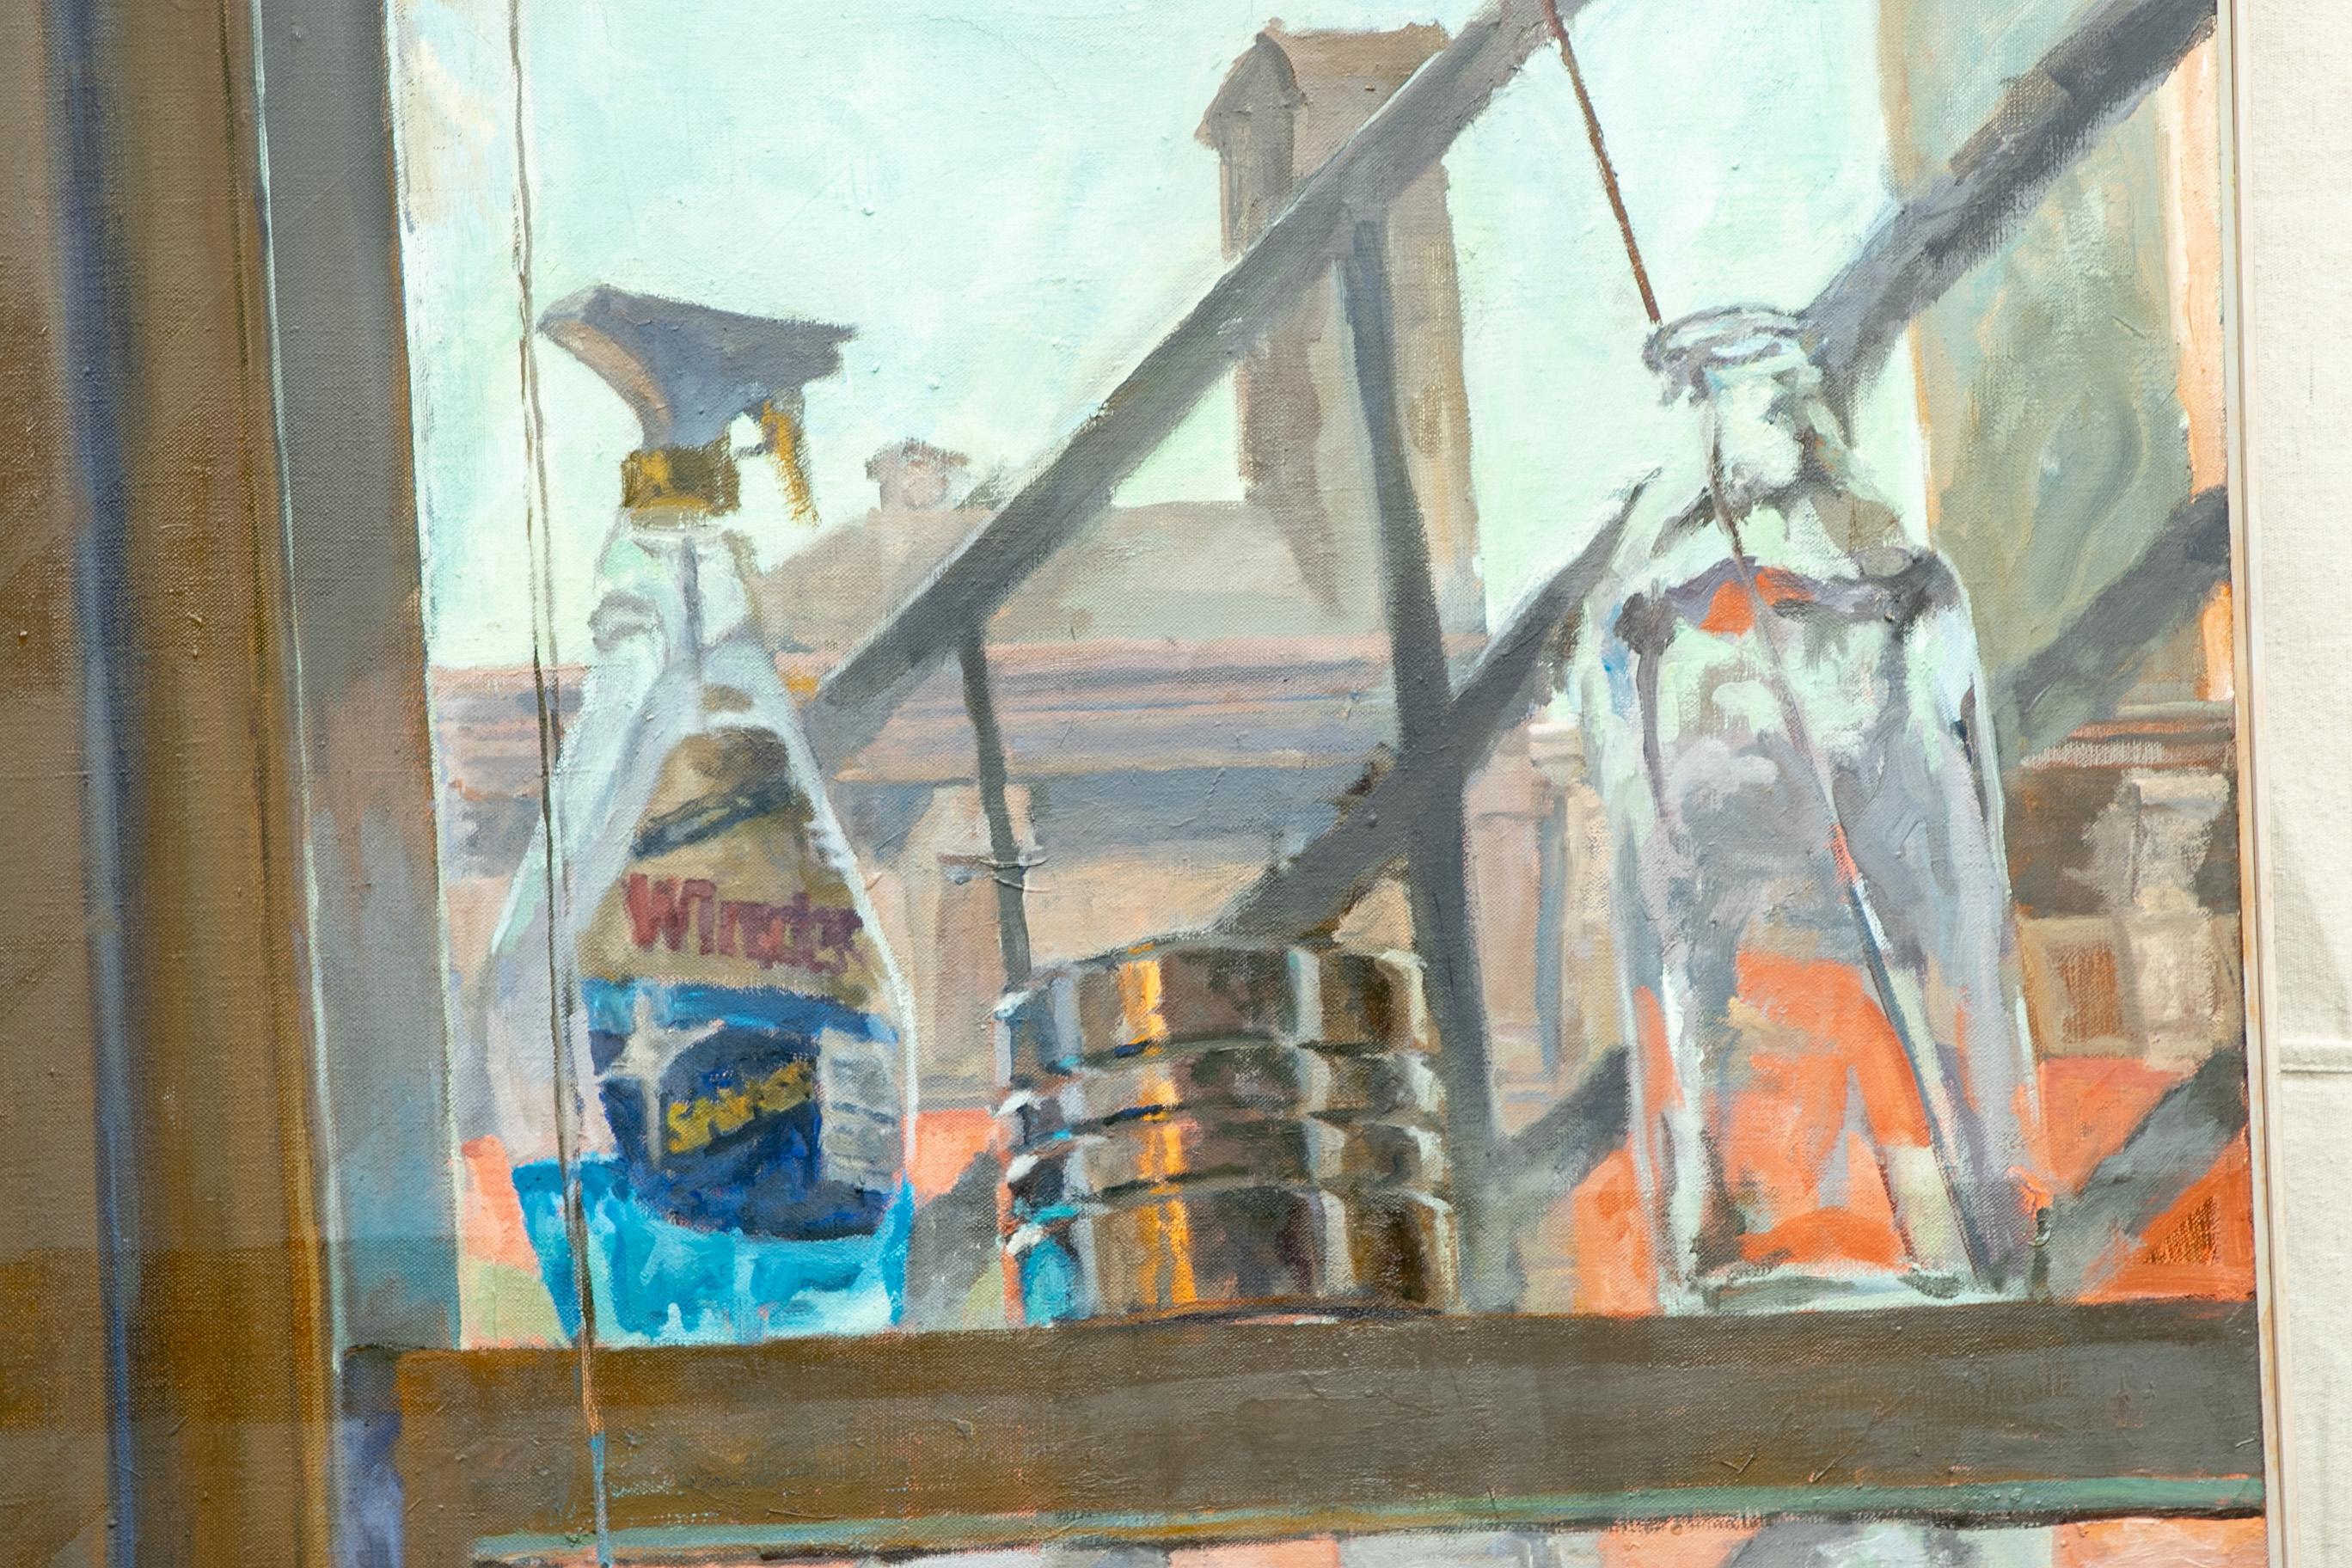 Very large Hicks, signed modern oil on canvas, modern Industrial scene, artist's name on the stretcher. A large scale painting with a window in an Industrial building looking out onto brownstones. The window frame has a bottle of Windex, a tin can